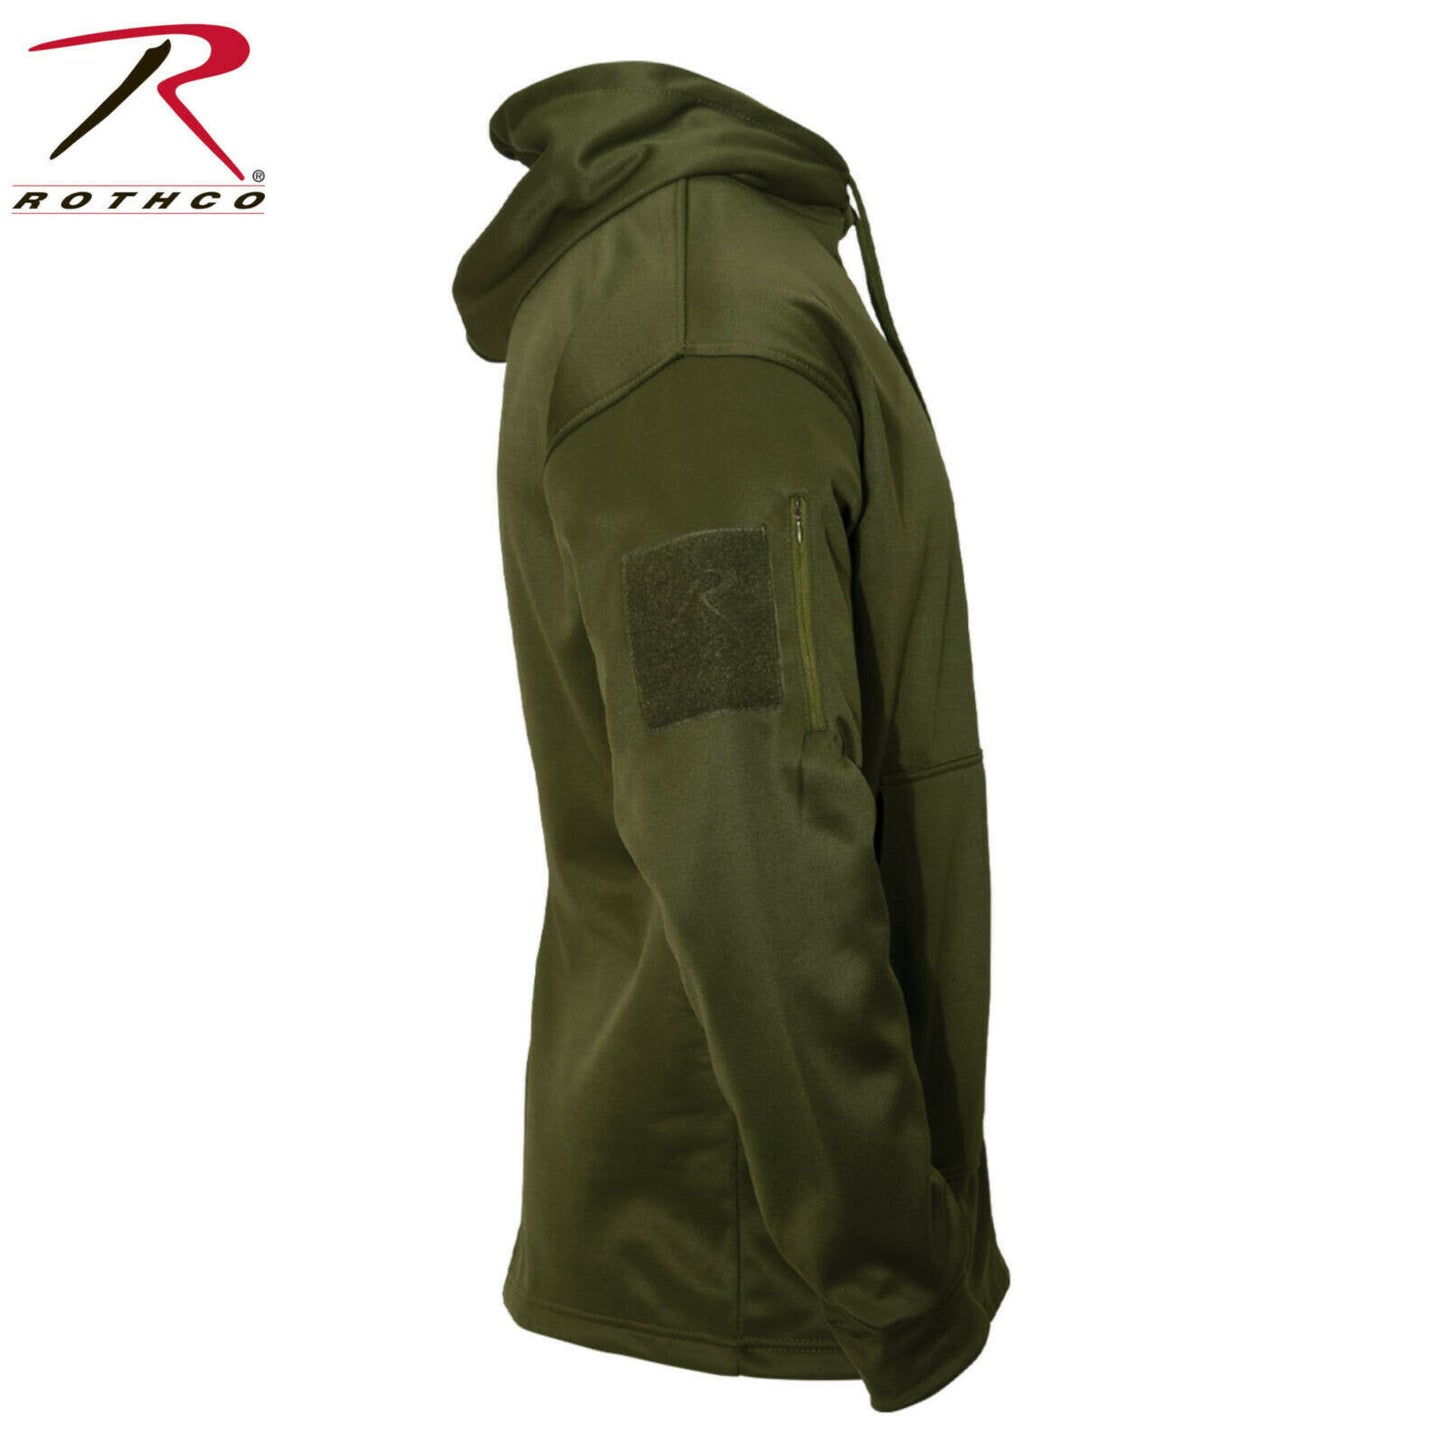 Rothco Men's Olive Drab Concealed Carry Hoodie Sweatshirt w/ US Flag Patch